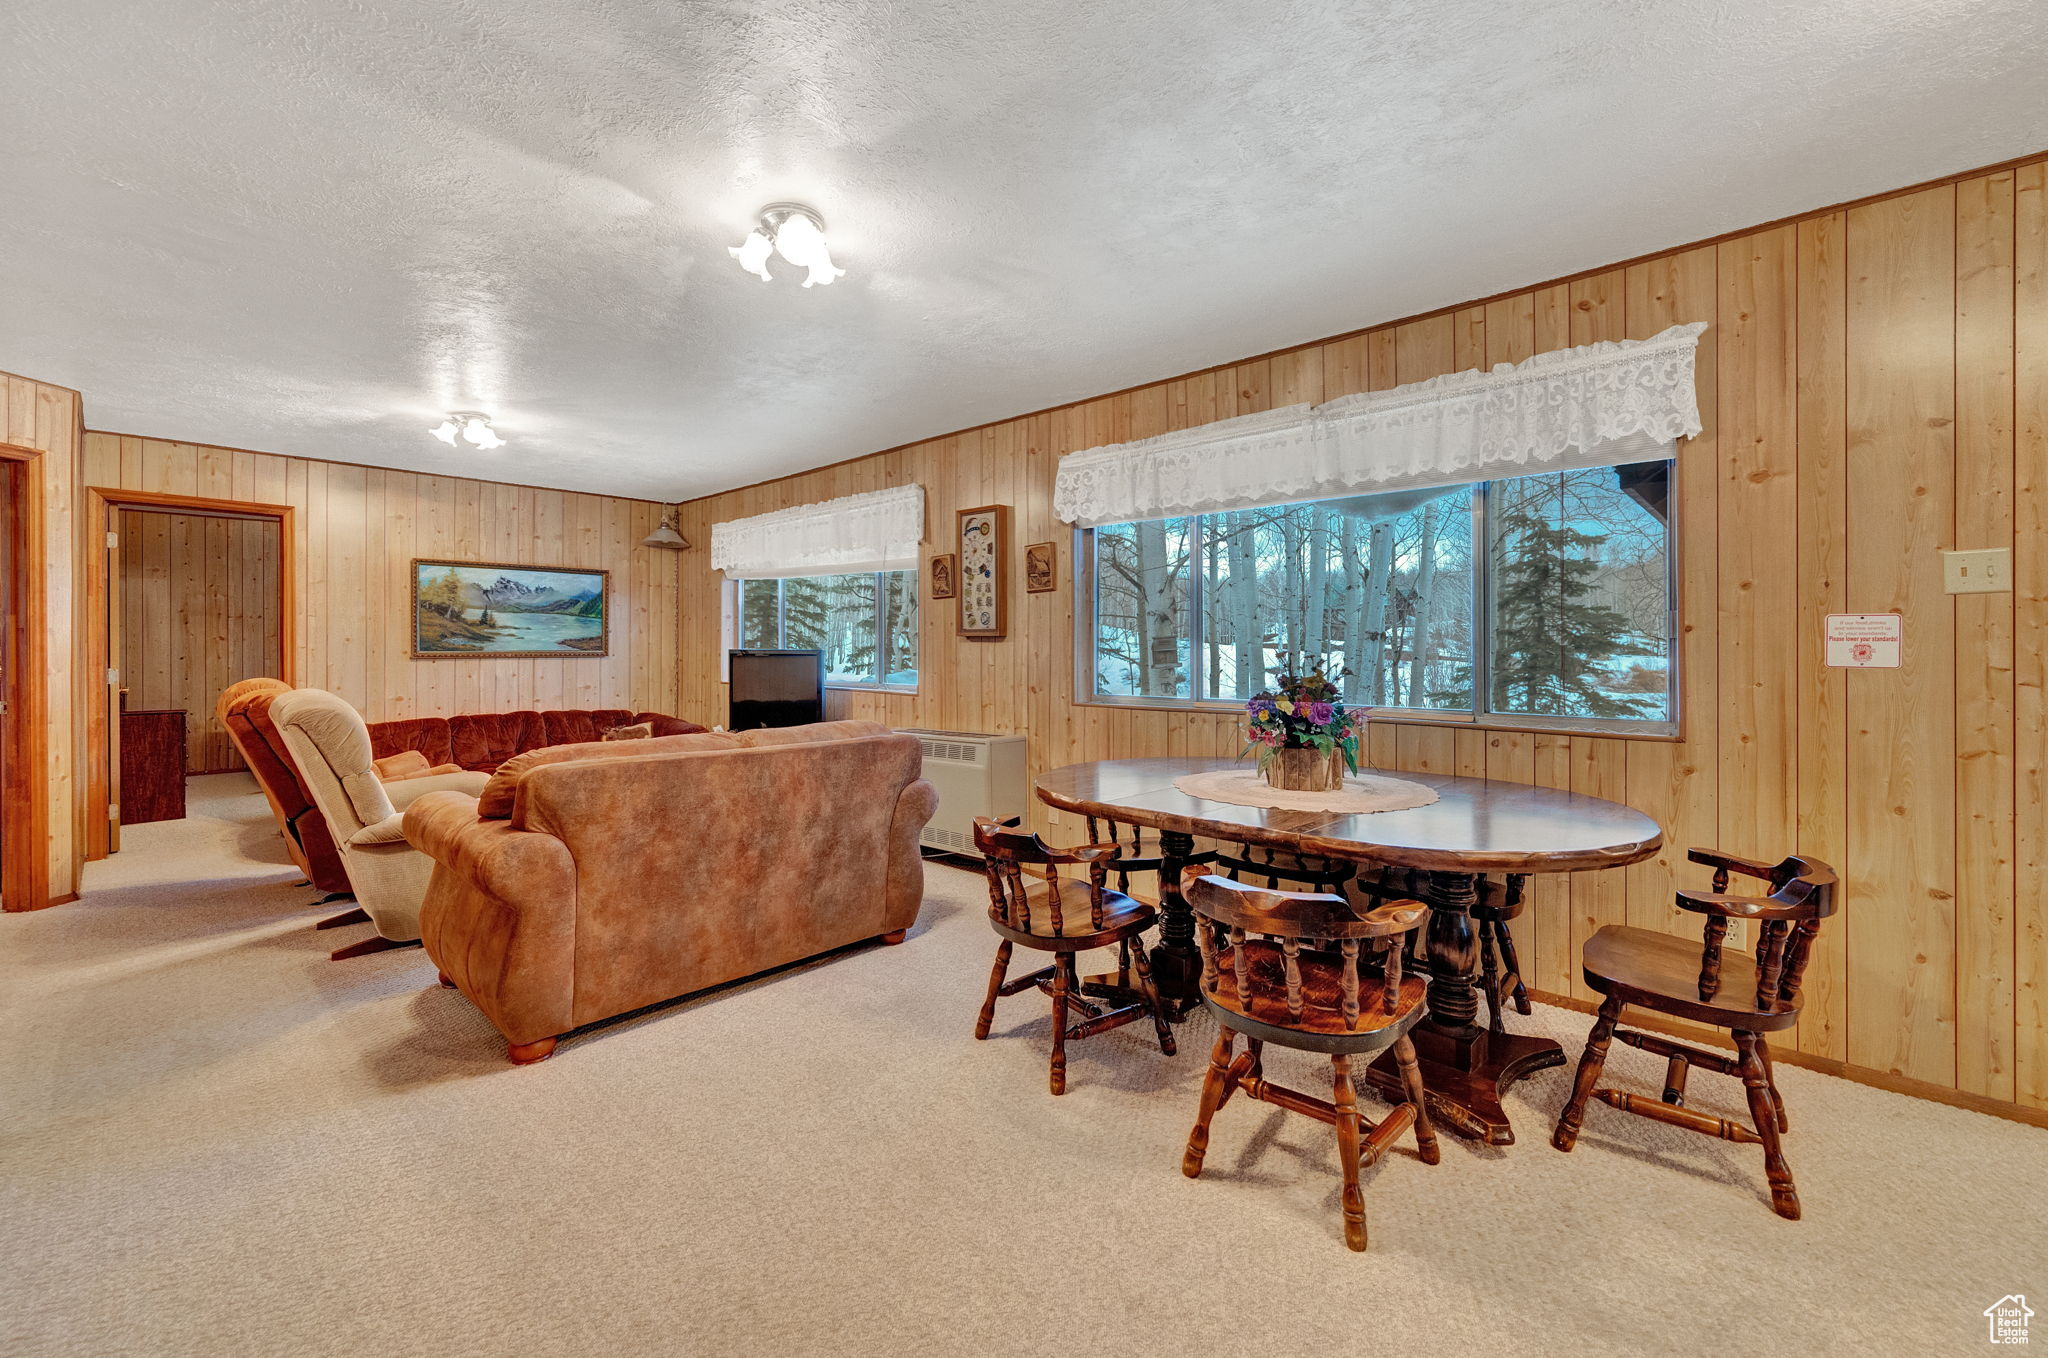 Dining room with a textured ceiling, wood walls, and light carpet